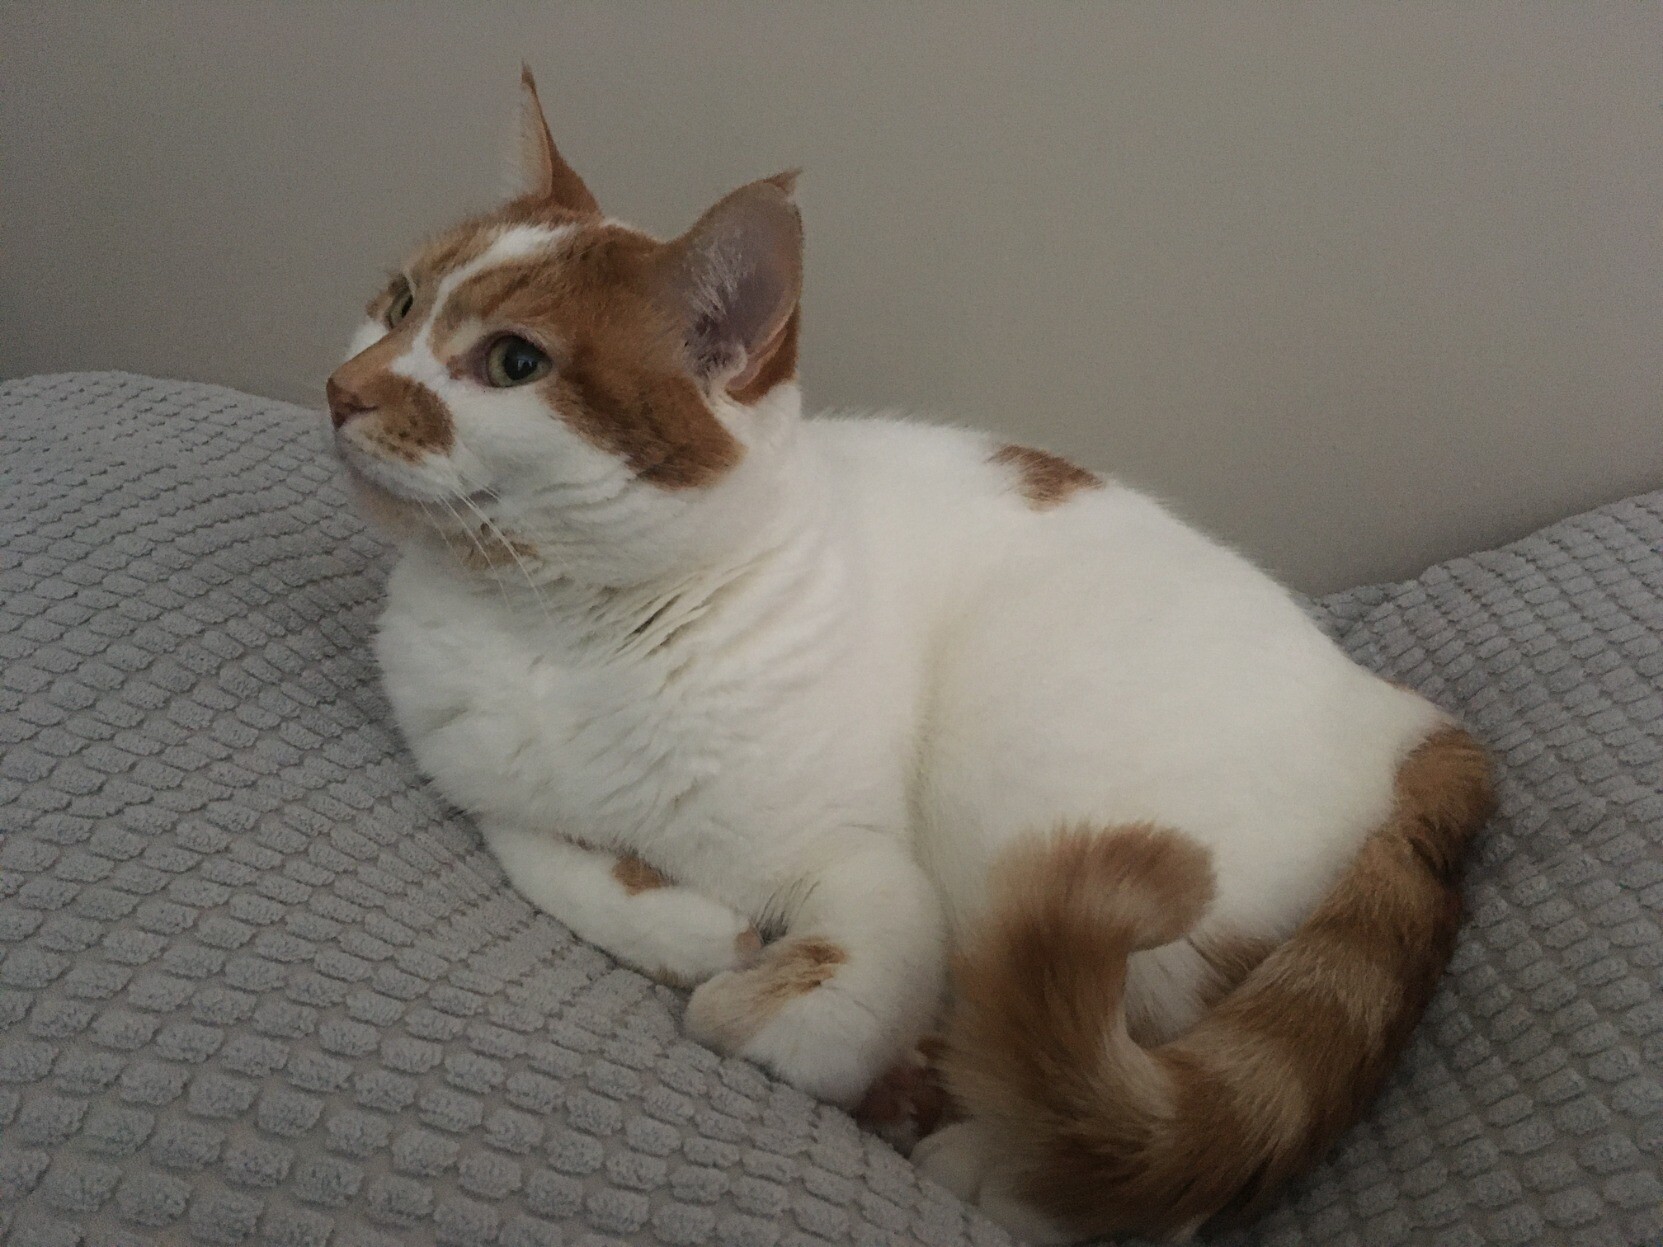 Charlie the cat sits comfortably on a pillow.